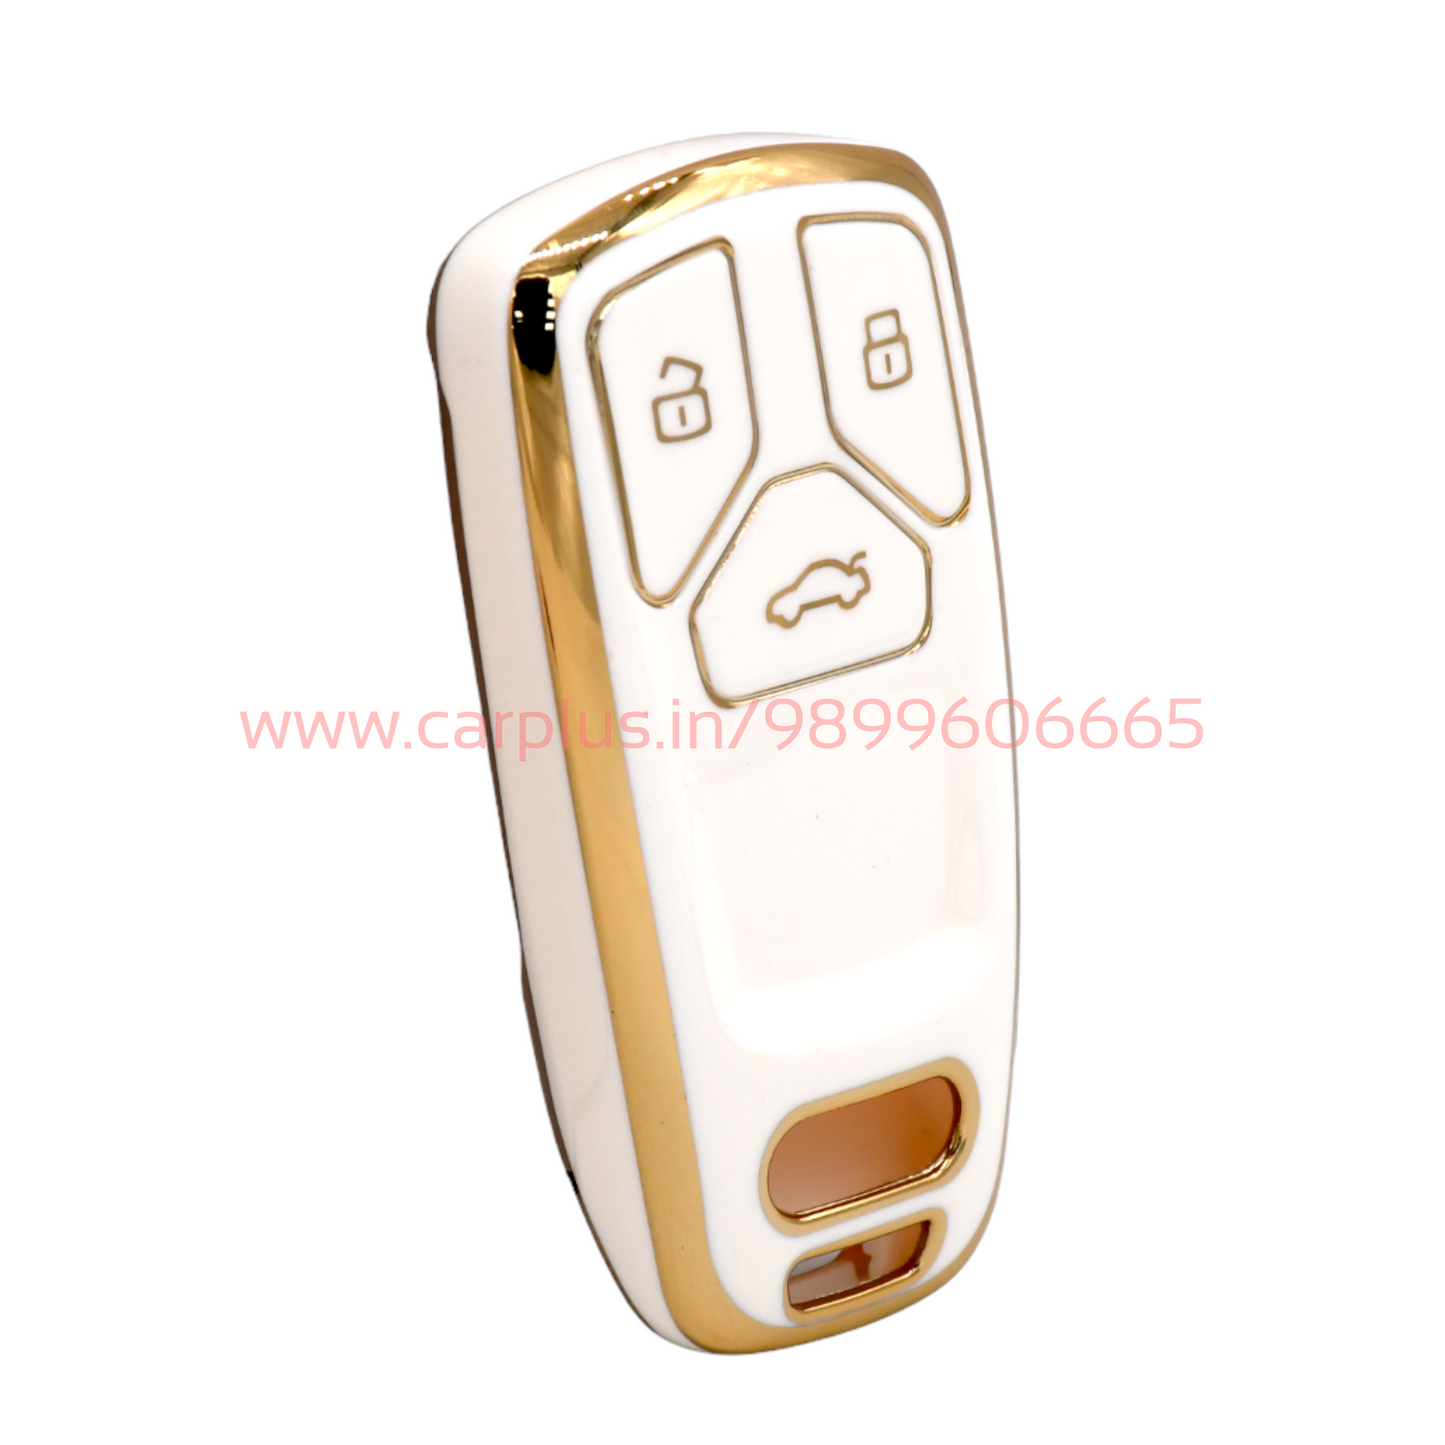 
                  
                    KMH TPU Gold Car Key Cover Compatible with Audi A4 TT TTS Q7 2016 2017 Key cover-TPU GOLD KEY COVER-KMH-KEY COVER-White-CARPLUS
                  
                